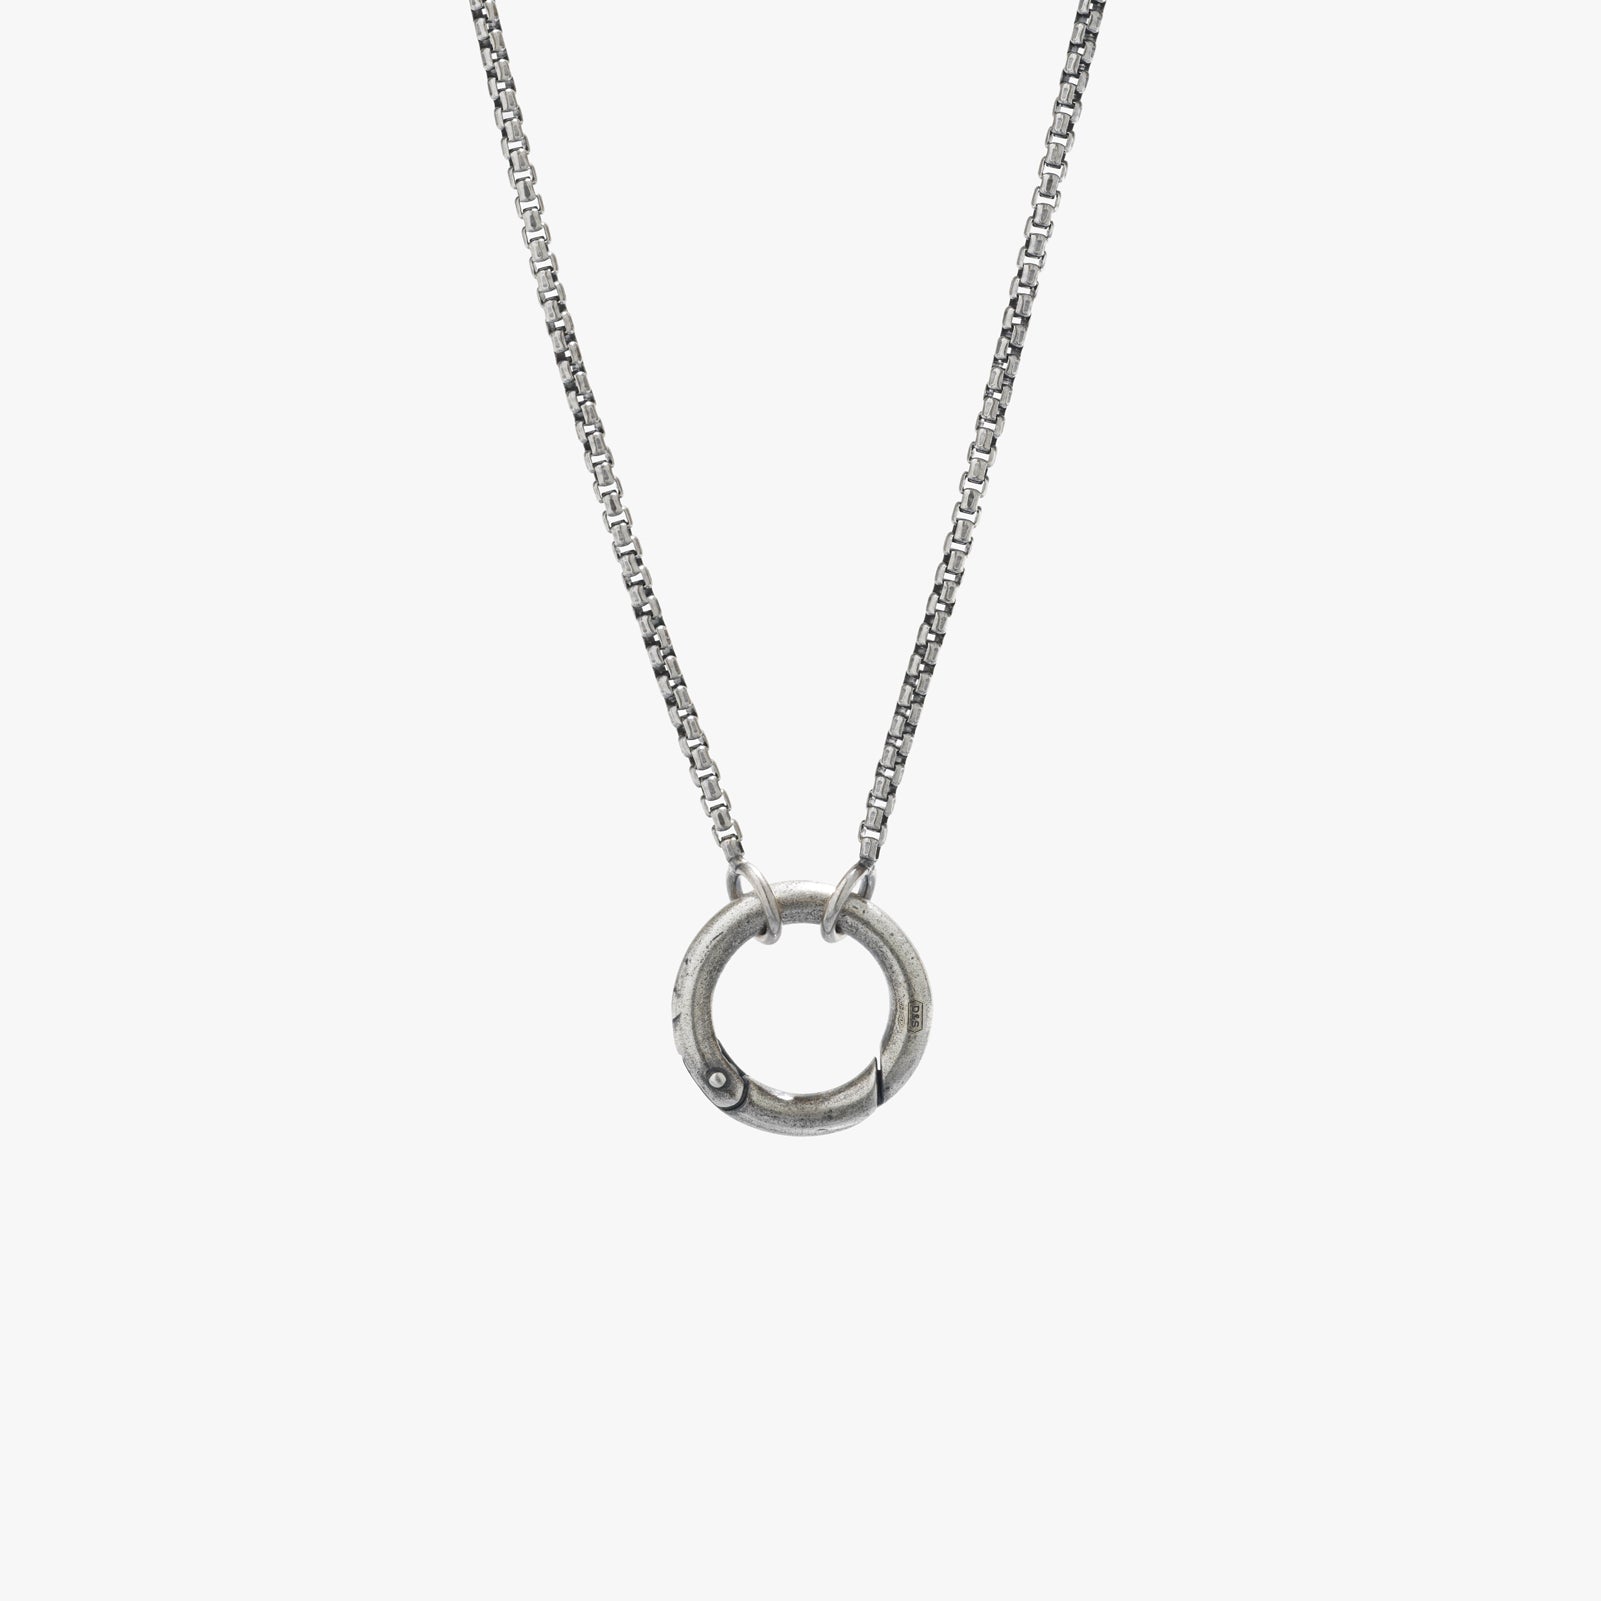 Amazon.com: Open Circle Necklace for Women - Sterling Silver Karma Necklace  Choker Layer Hammered Circle Minimal Adjustable Length (15-17 inches  adjustable) : Handmade Products